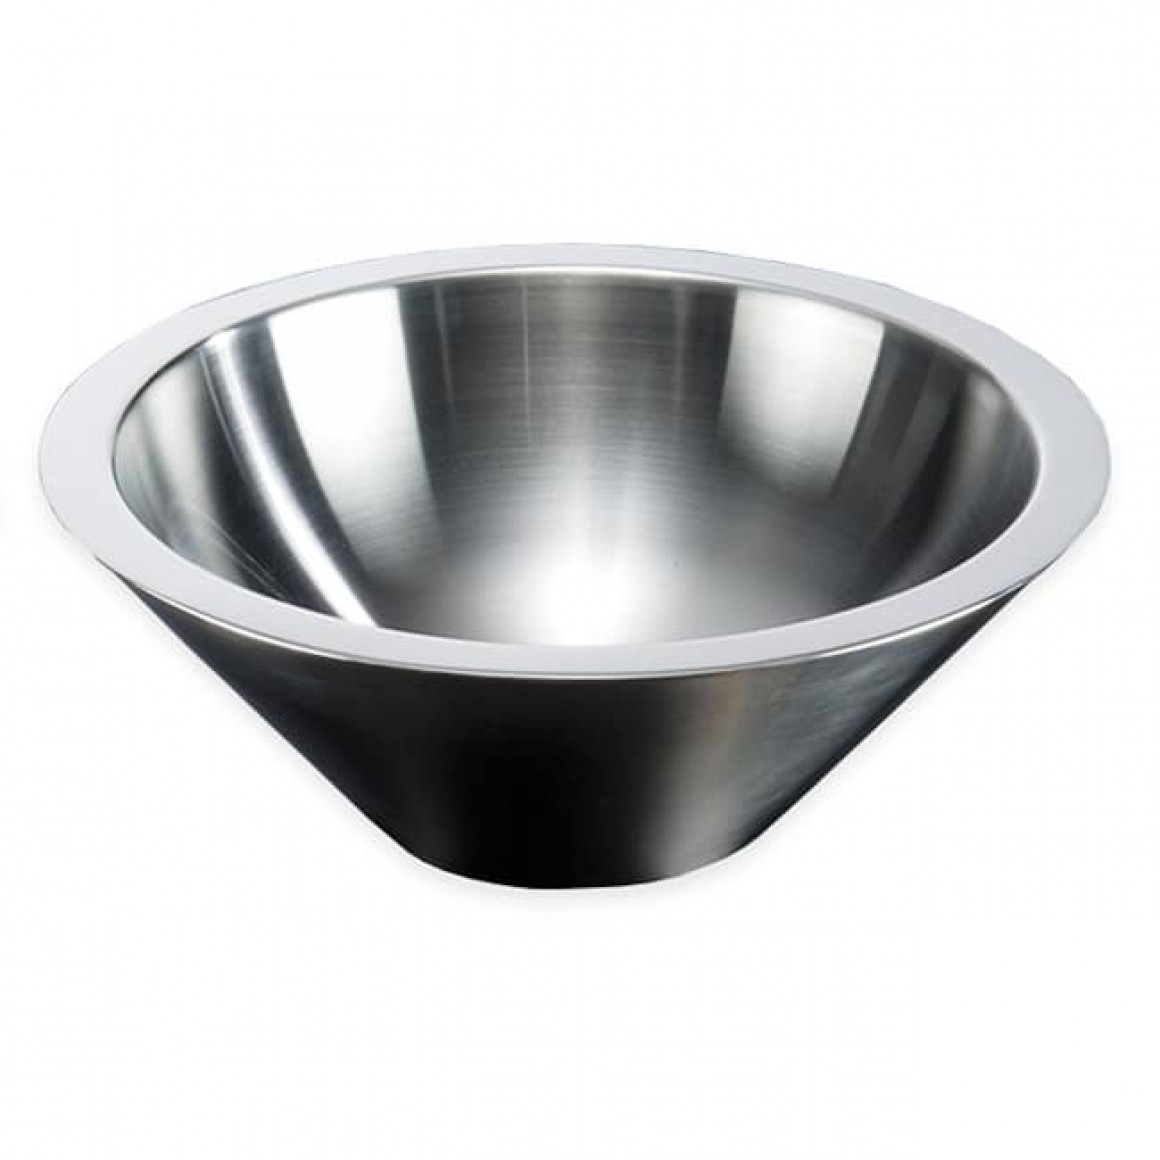 STAINLESS STEEL, DOUBLE WALL BOWL, CONICAL, 60 OZ.